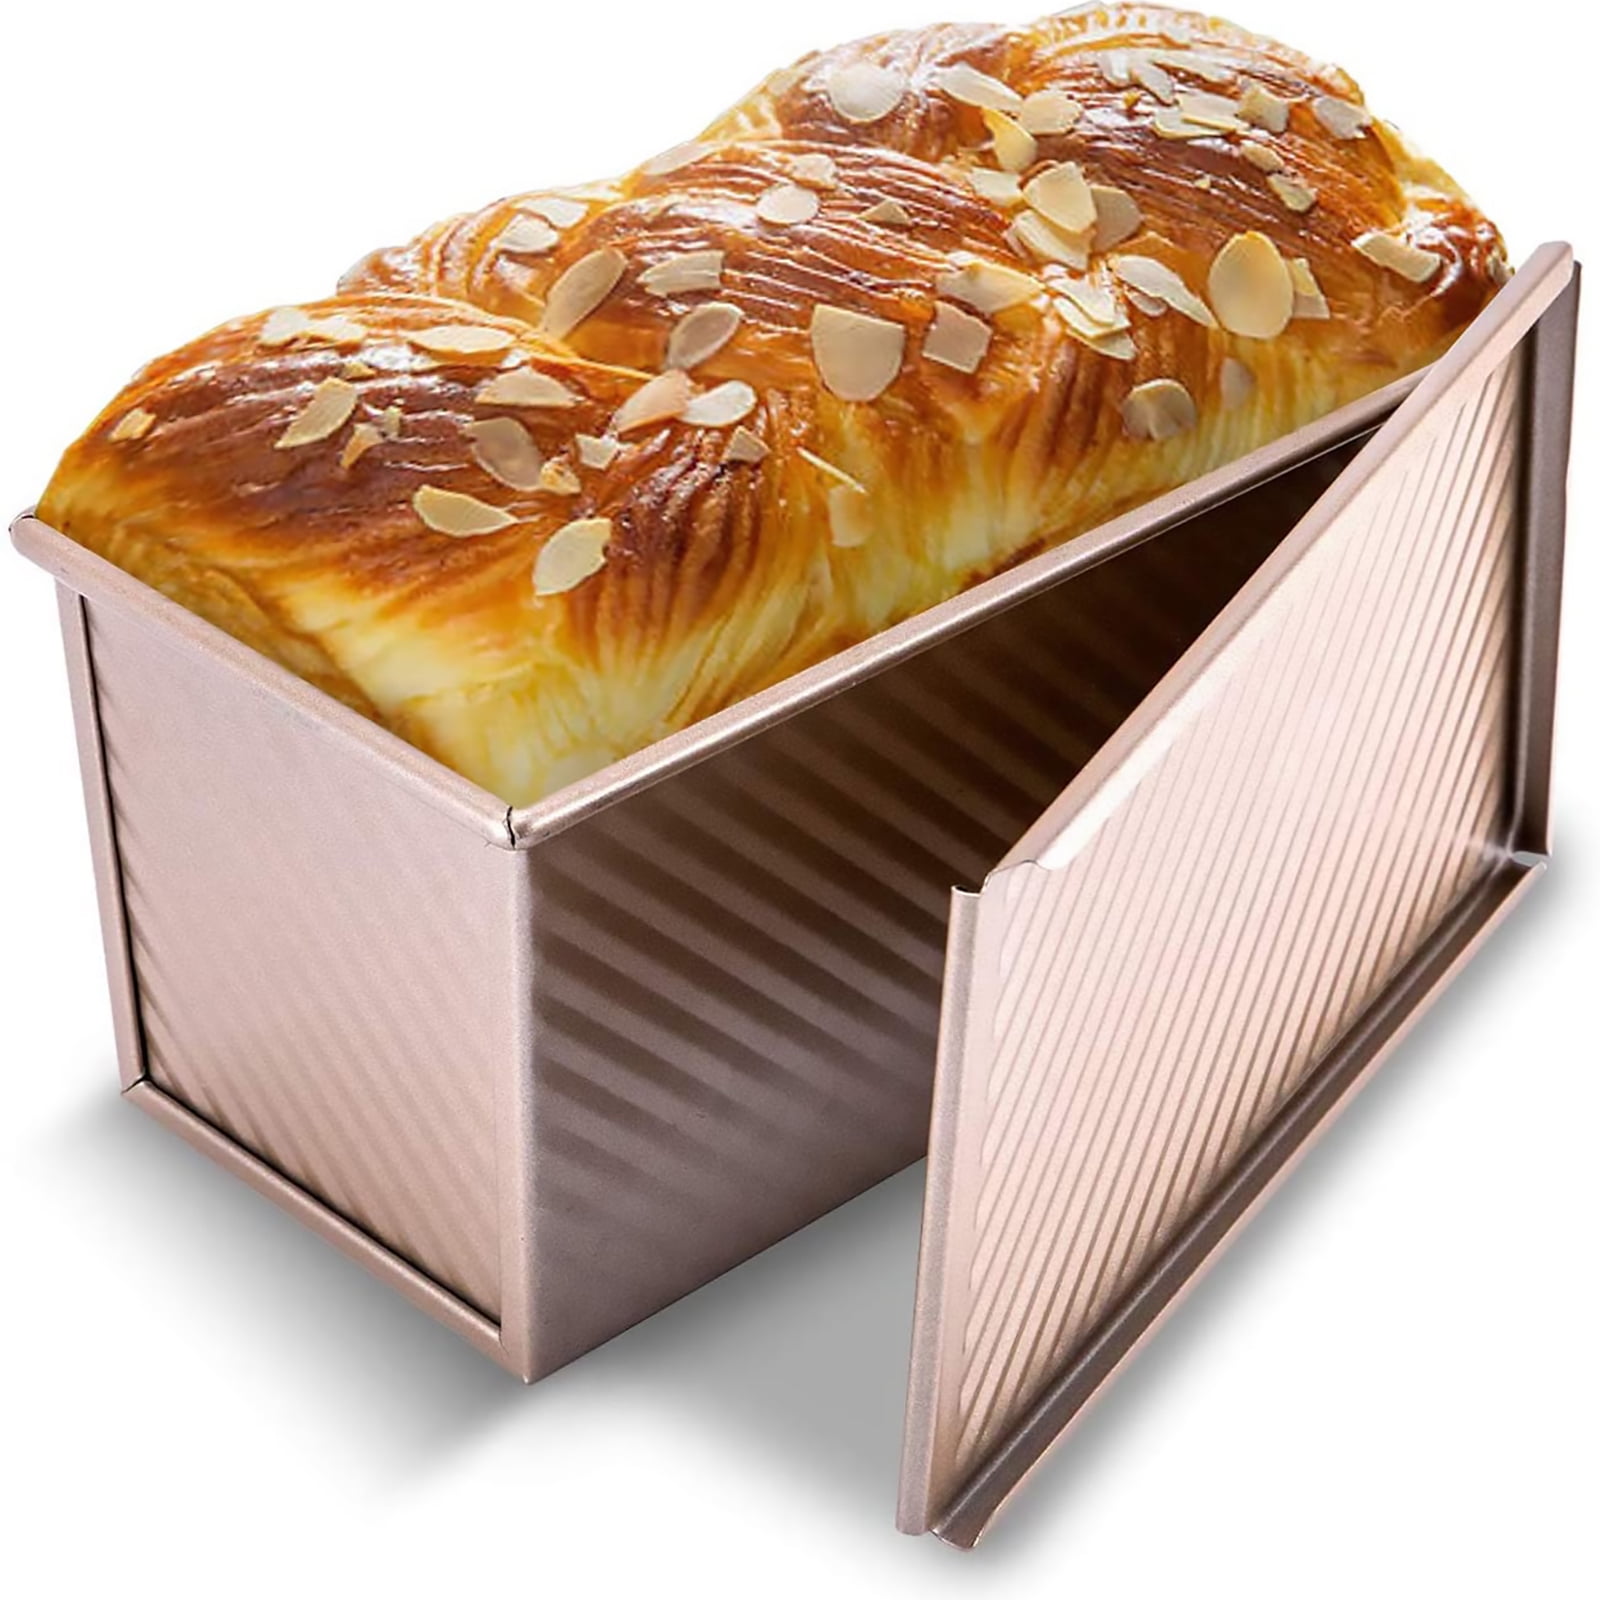 1pc 8.2 Inches Christmas Bread Loaf Pan, Corrugated Covered Toast